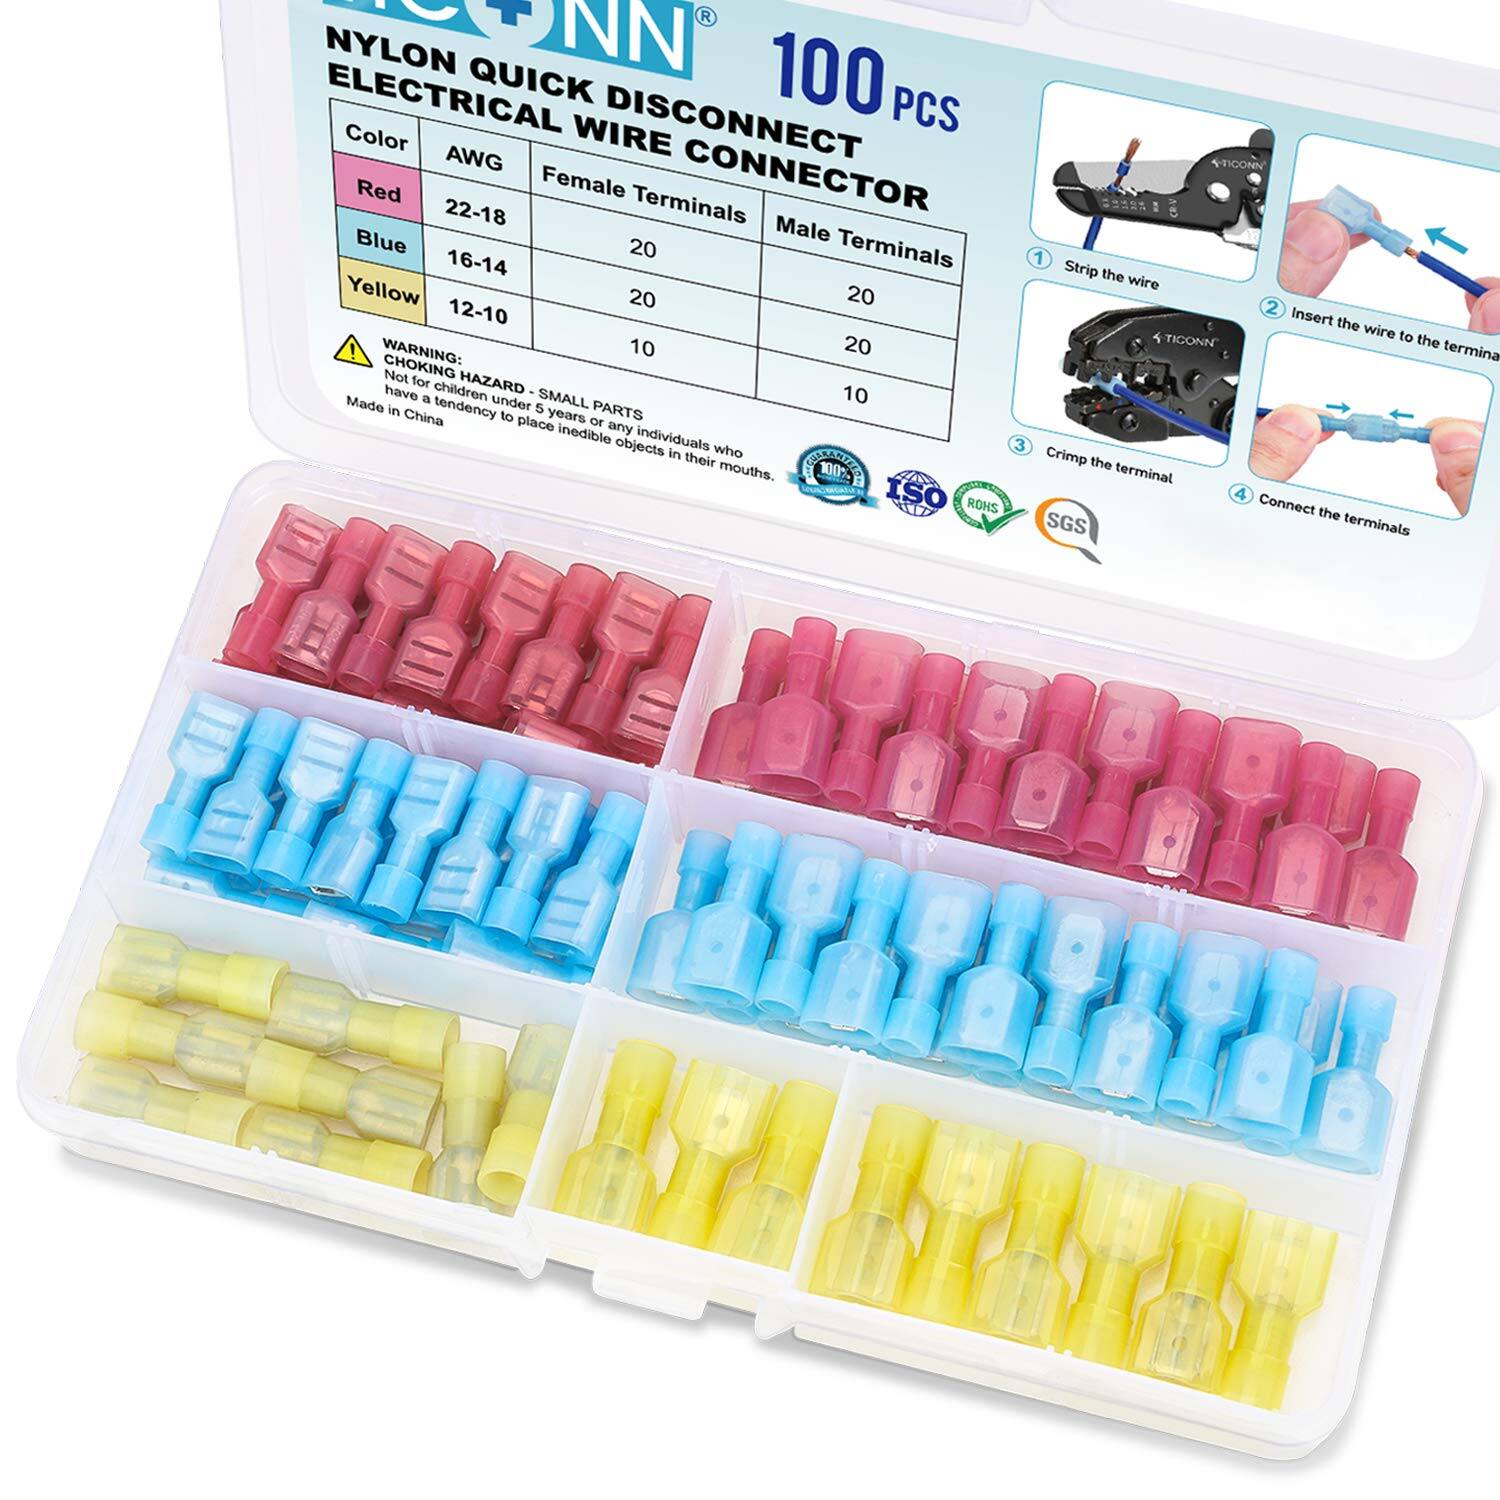 Insulated Electrical Wire & Butt and Nylon Spade Quick Disconnect Connectors Kit from $6.27 + Free Shipping w/ Amazon Prime or Orders $25+